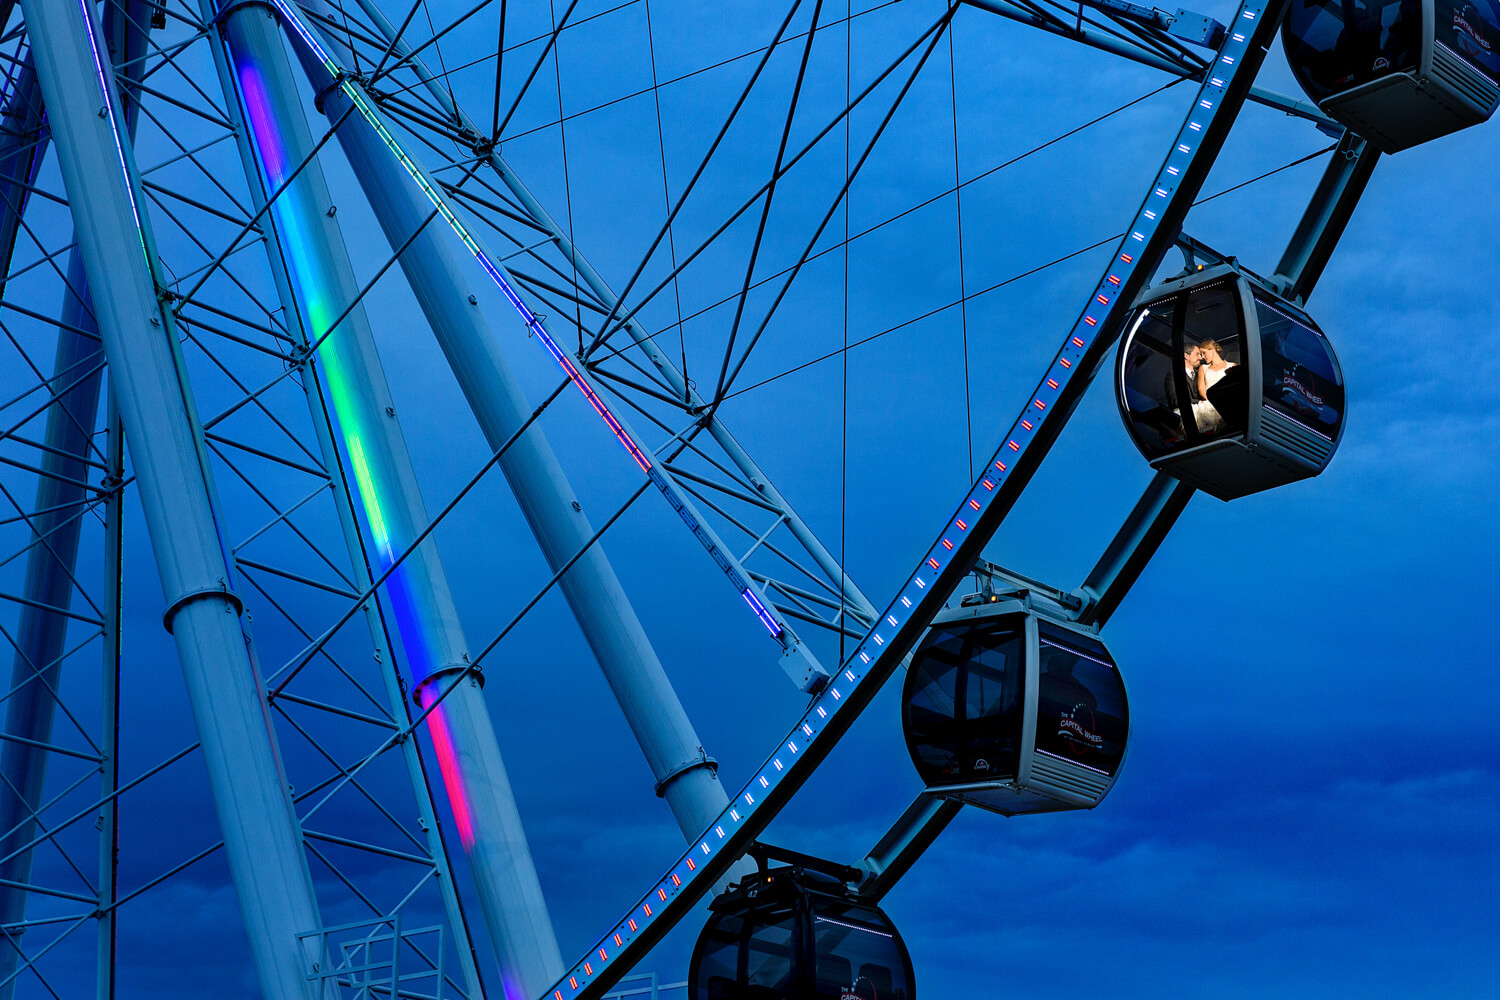 This is a portrait of a couple on a ferris wheel, the photographer used off camera flash to reach them and light them, you see a blue sky with part of the wheel while the couple kisses in their seat, multiple award winner national harbor washington DC wedding